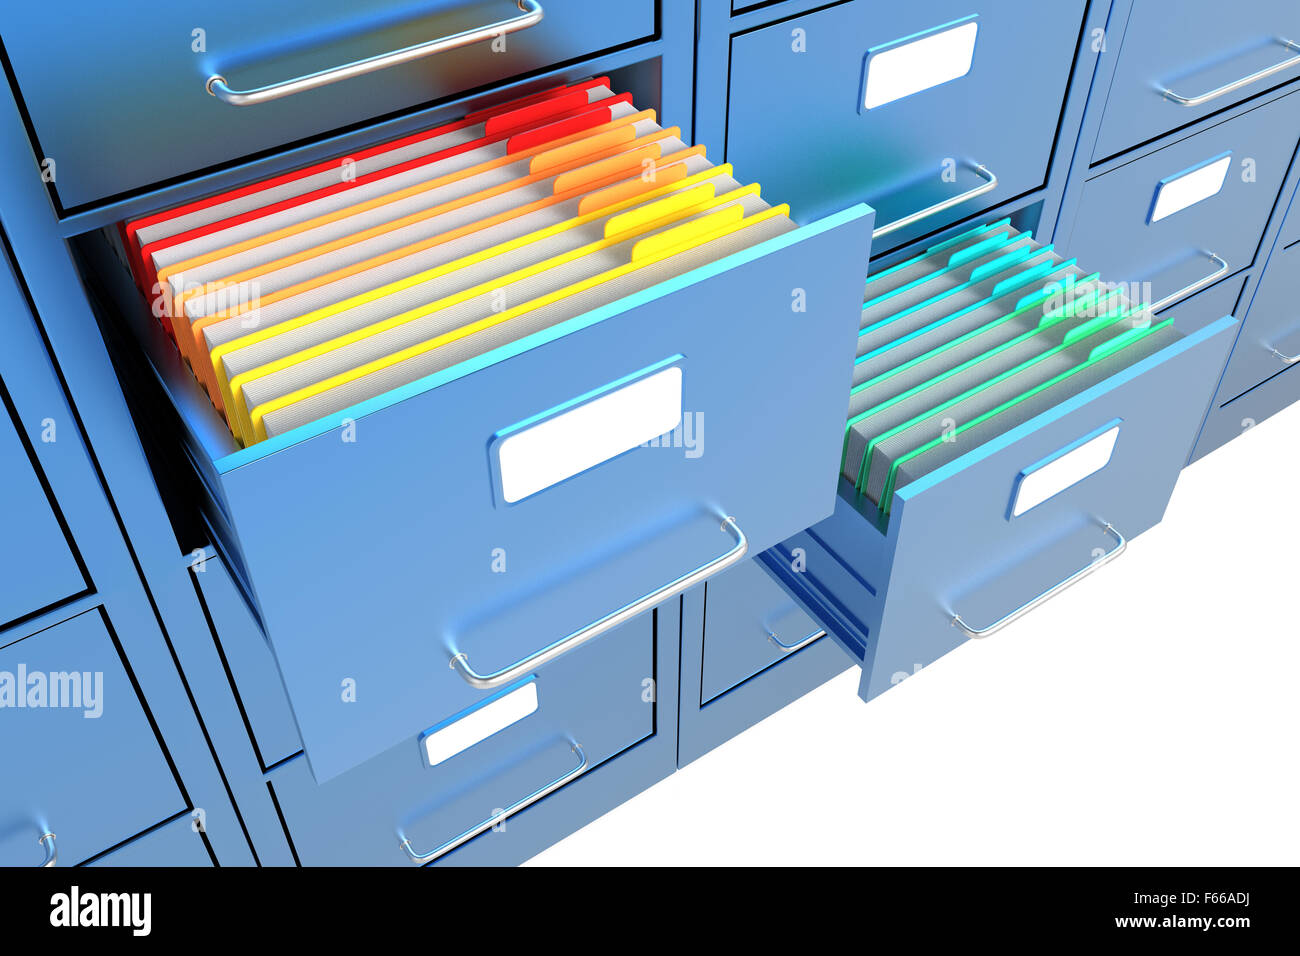 Folders In The File Cabinet Stock Photo 89879710 Alamy